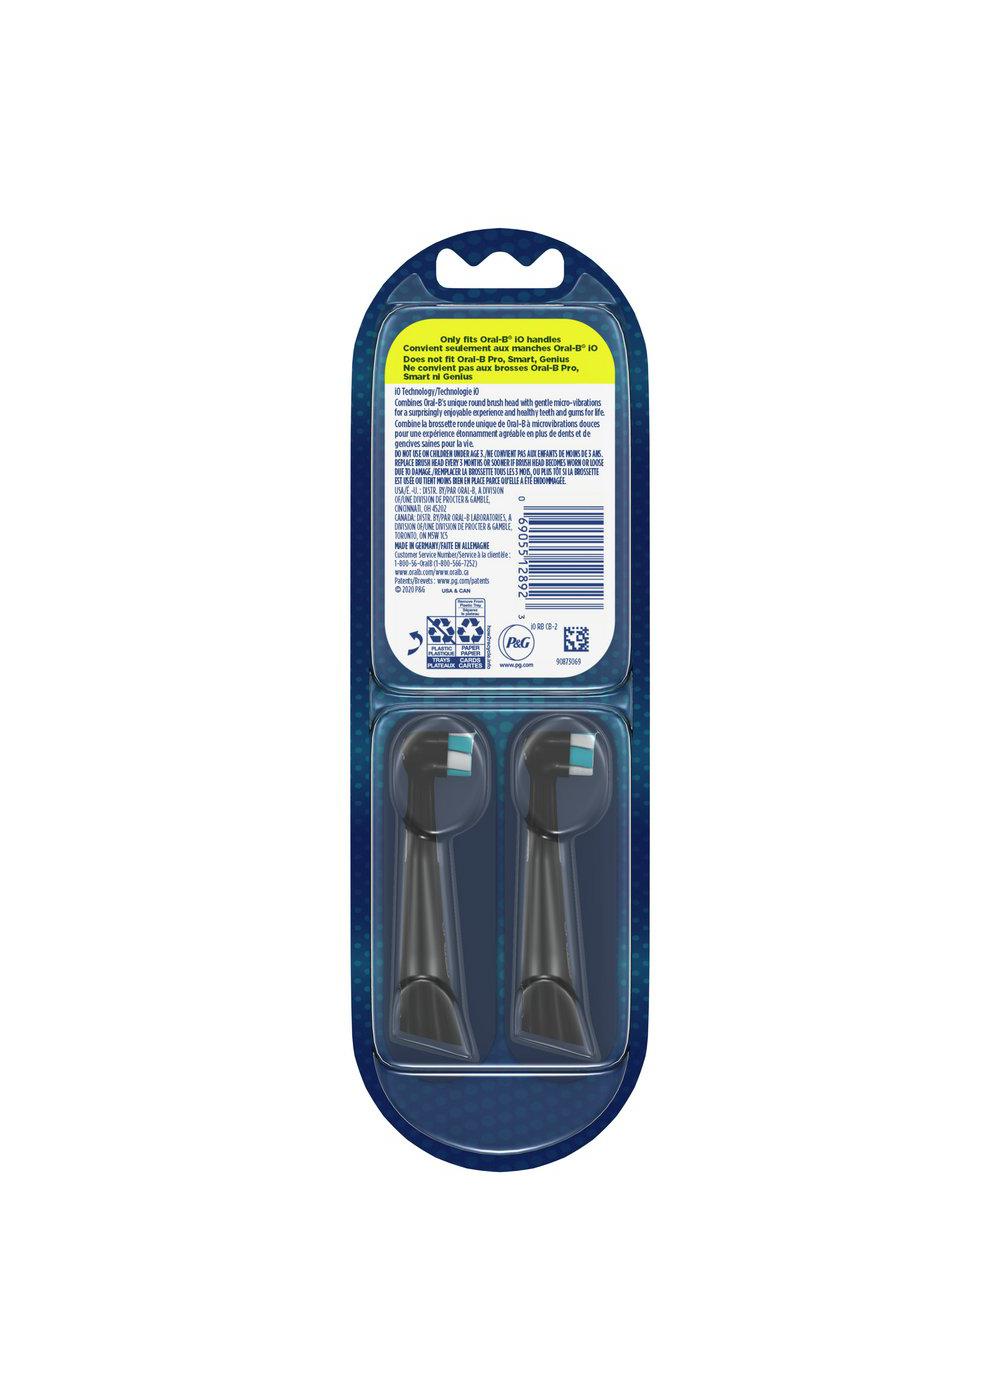 Oral-B iO Ultimate Clean Replacement Brush Heads - Black; image 10 of 10